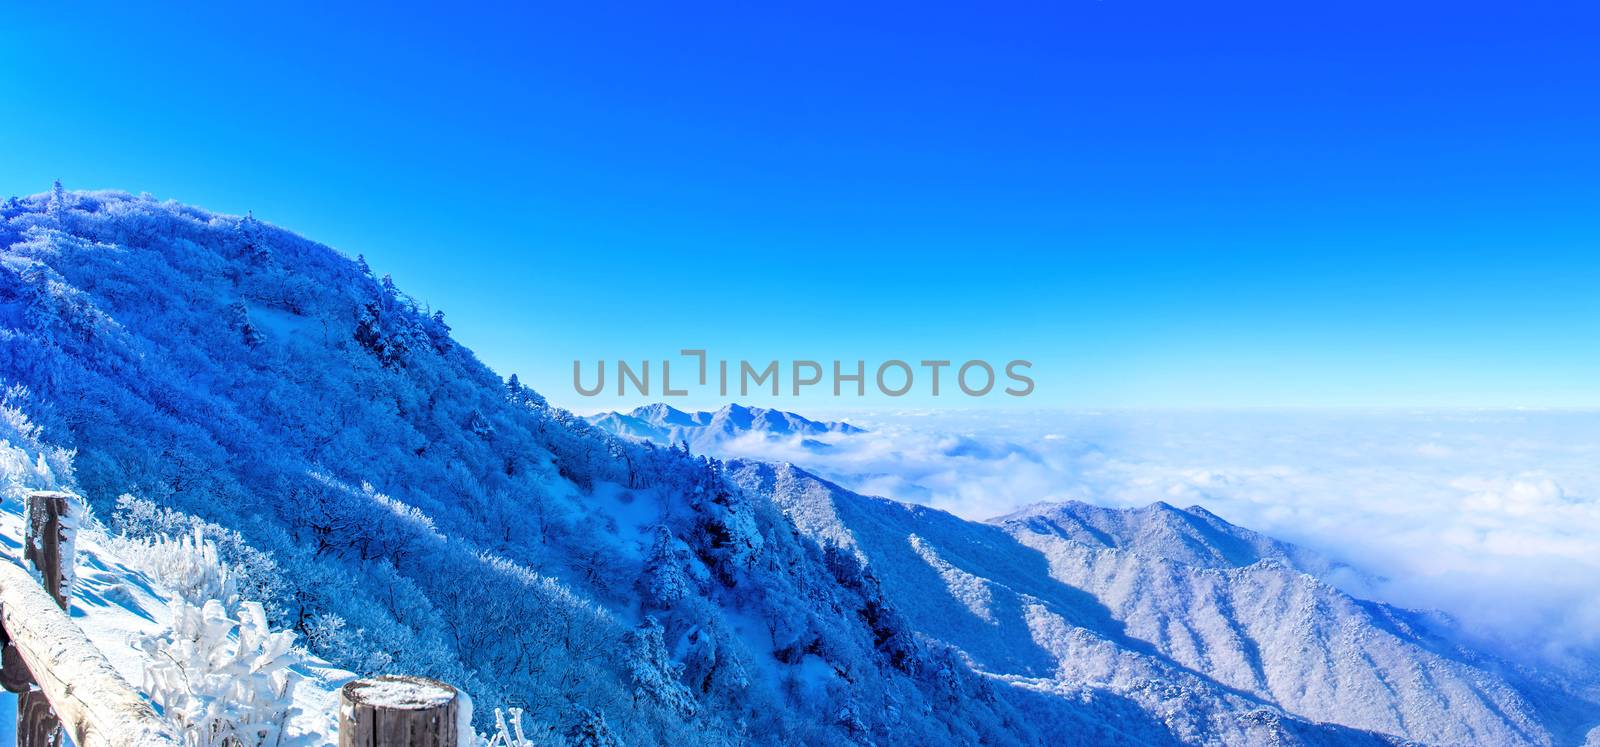 Deogyusan mountains is covered by snow and morning fog in winter by gutarphotoghaphy